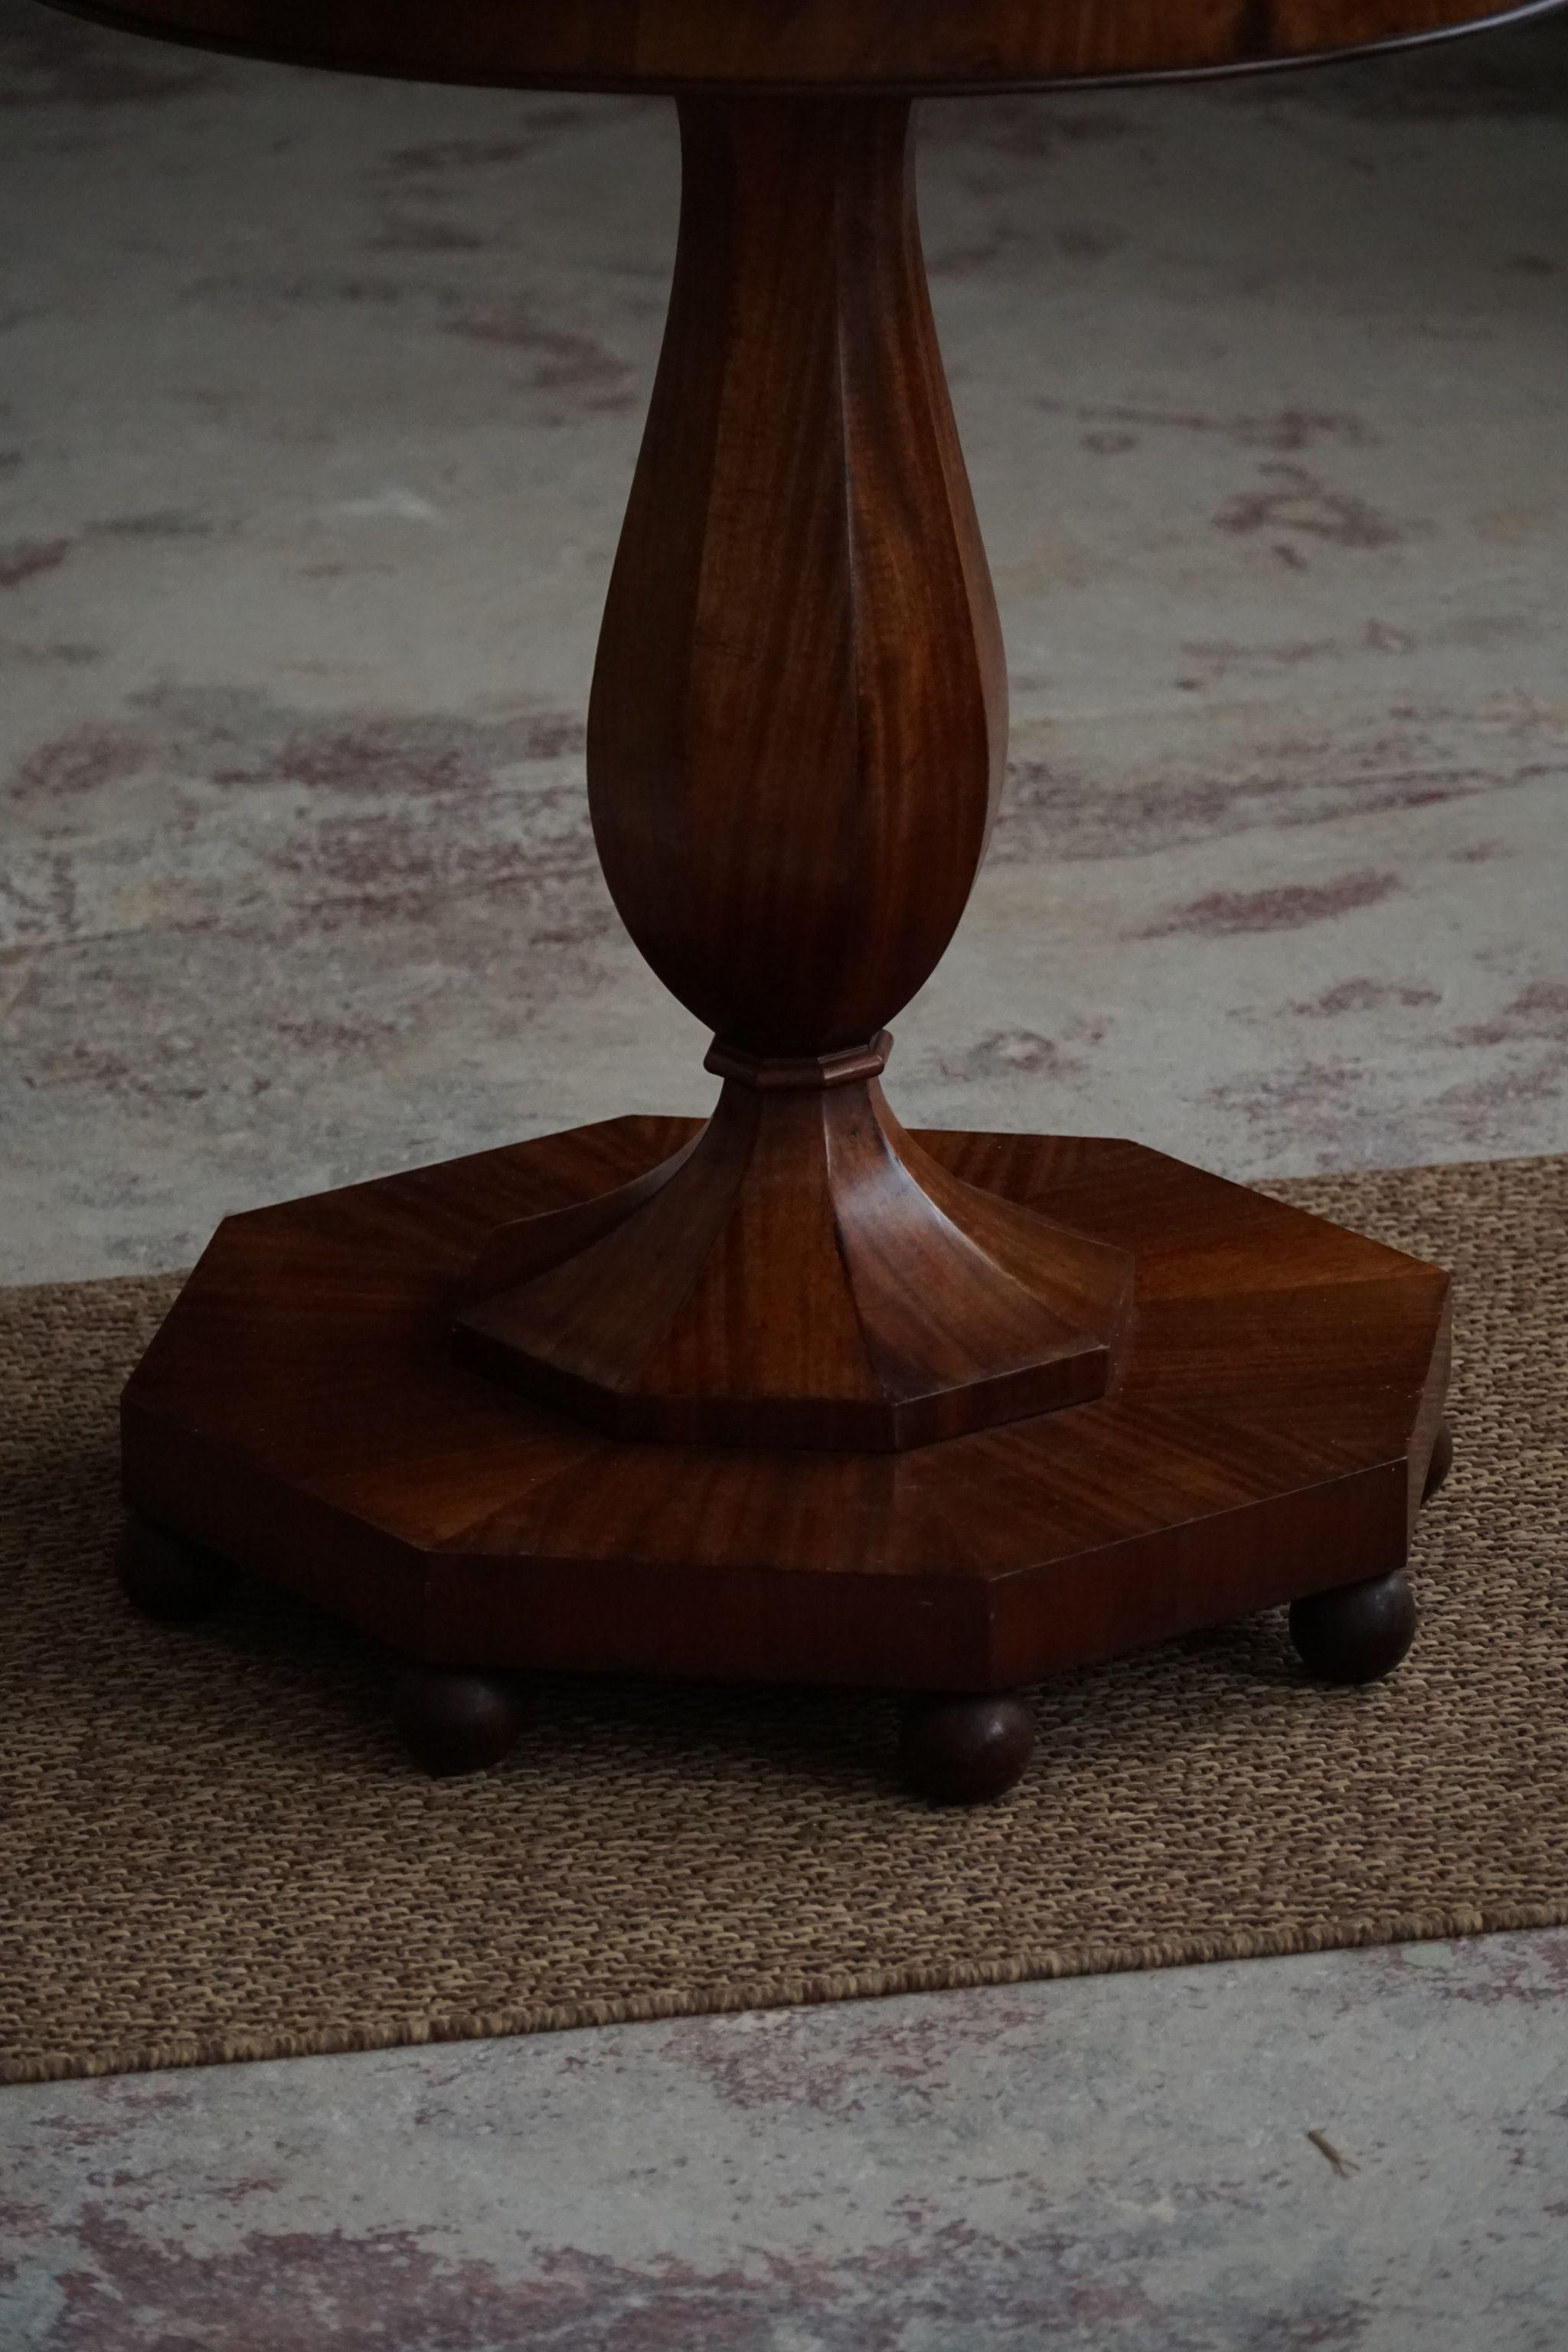 Art Deco, Round Pedestal / Side Table in Walnut, By a Danish Cabinetmaker, 1940s For Sale 2